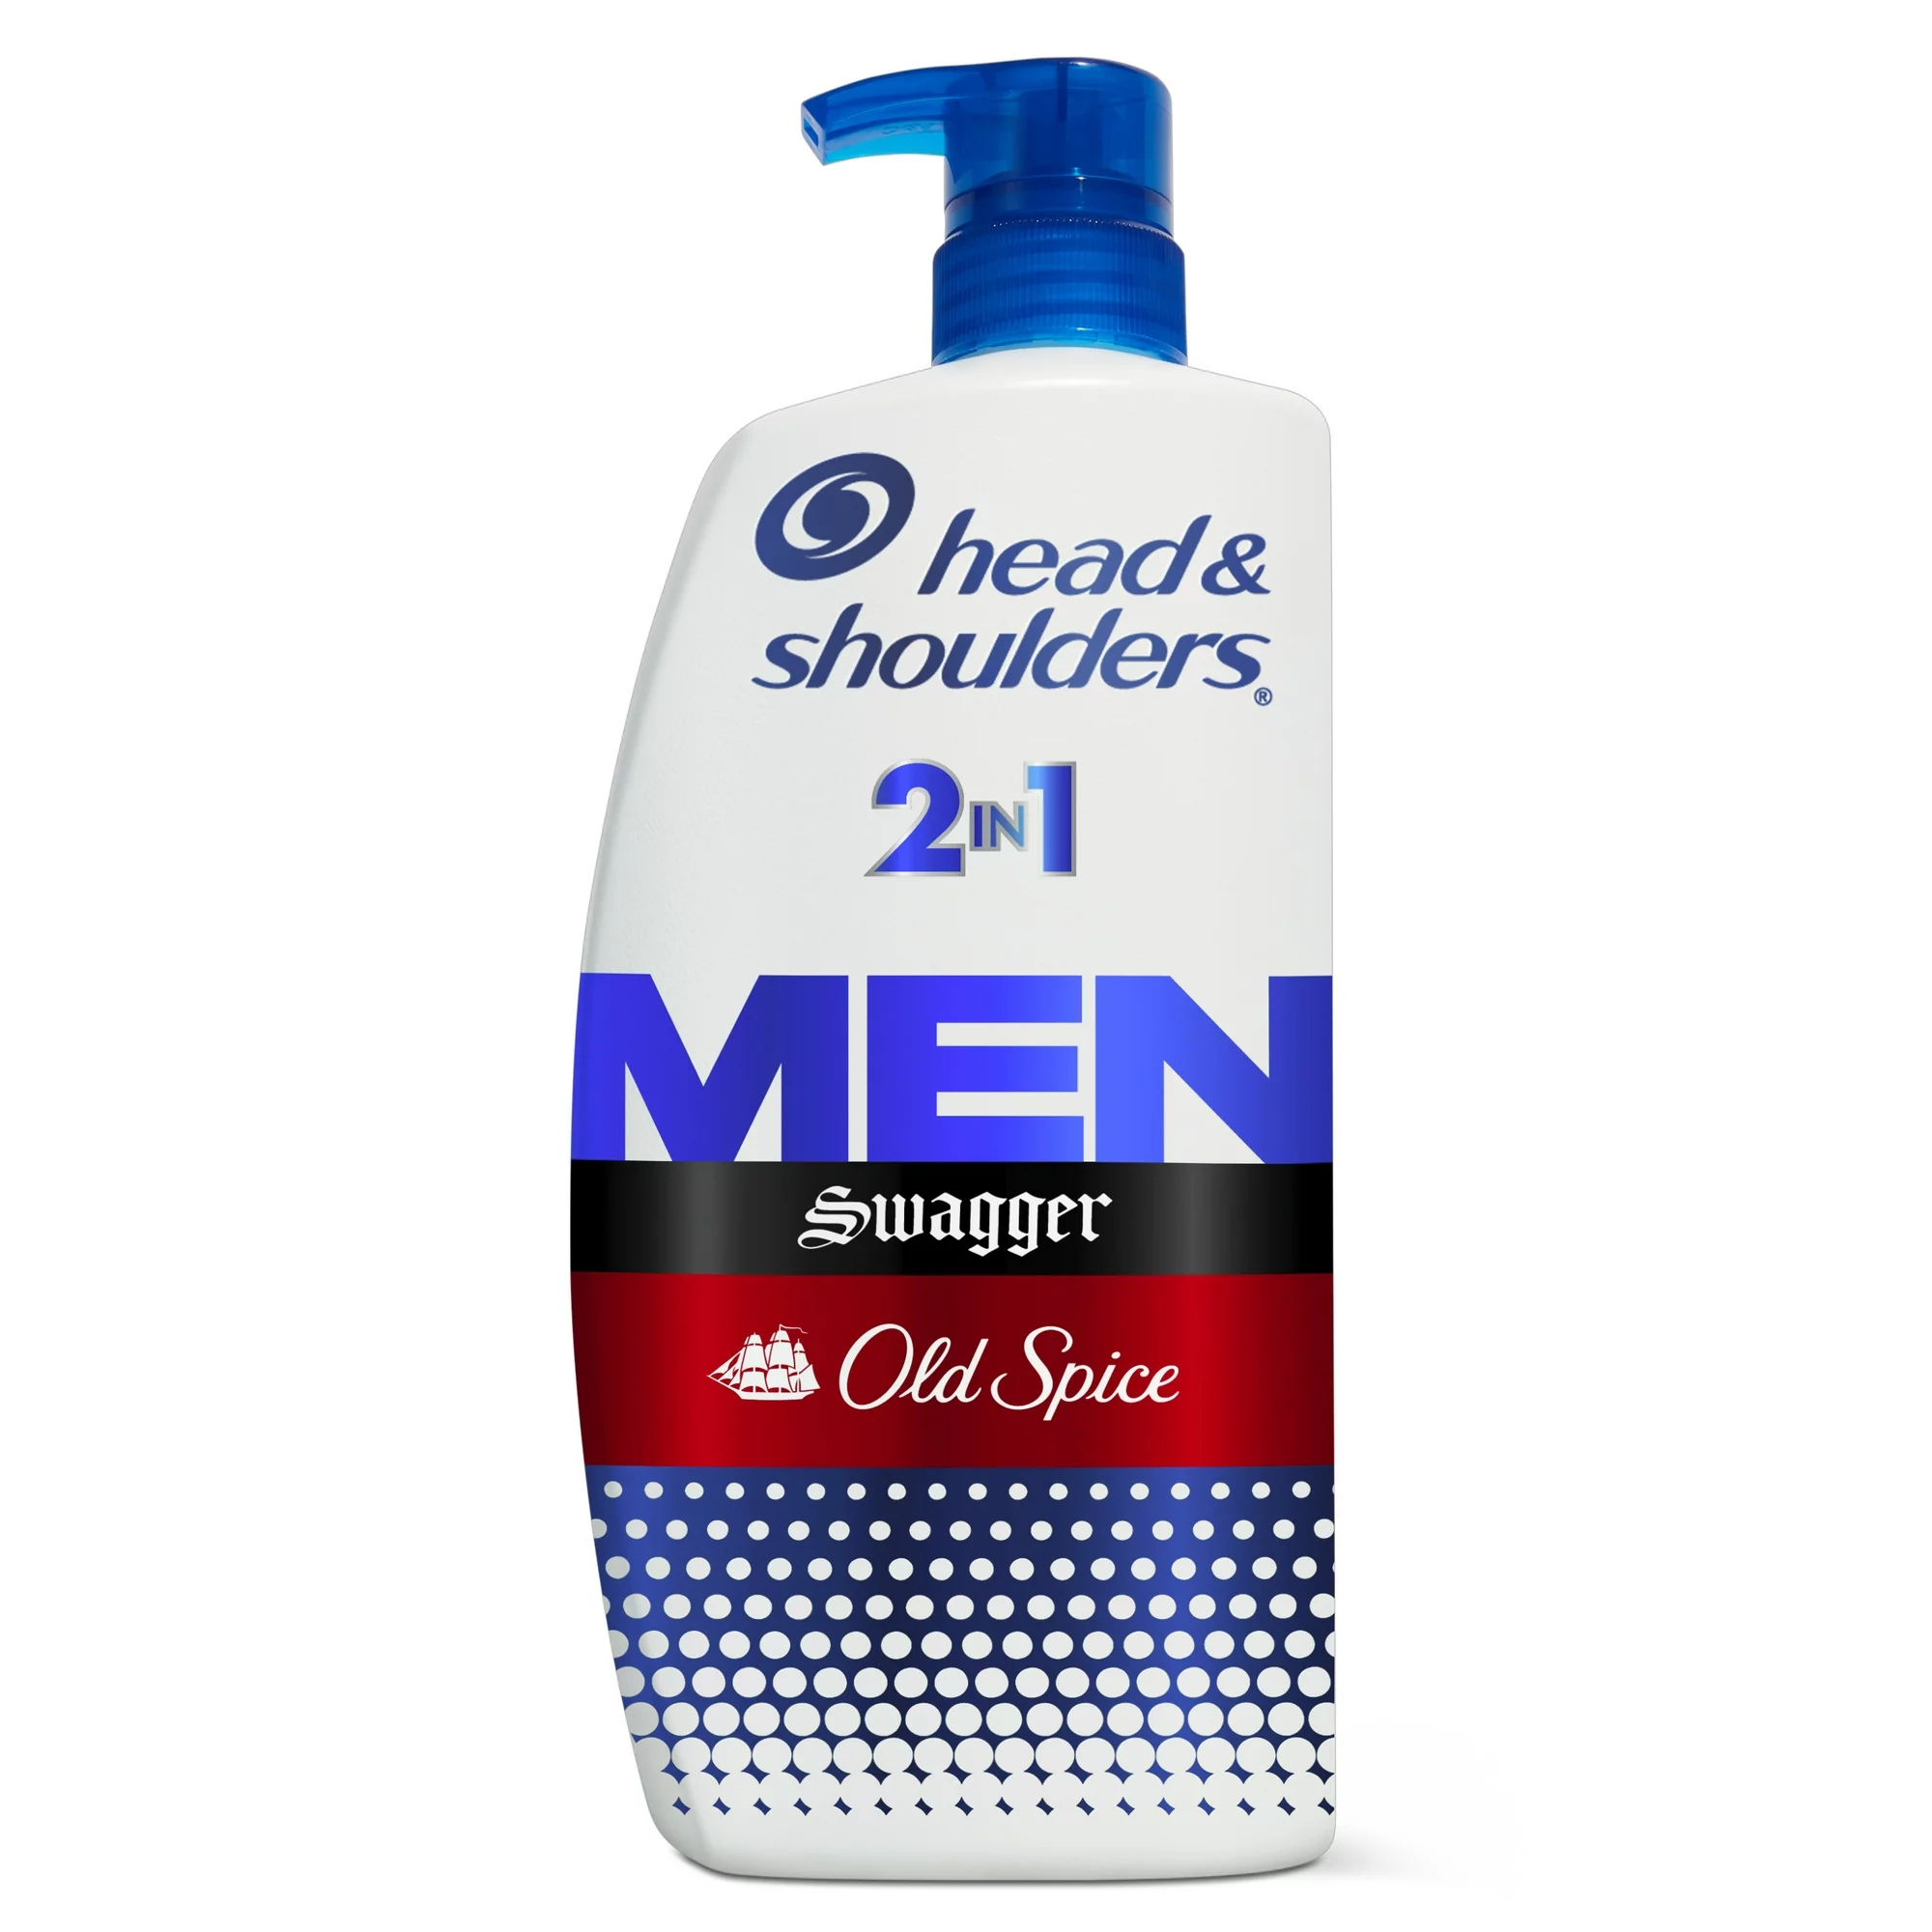 Head & Shoulders 2-in-1 Shampoo and Conditioner with Old Spice Swagger